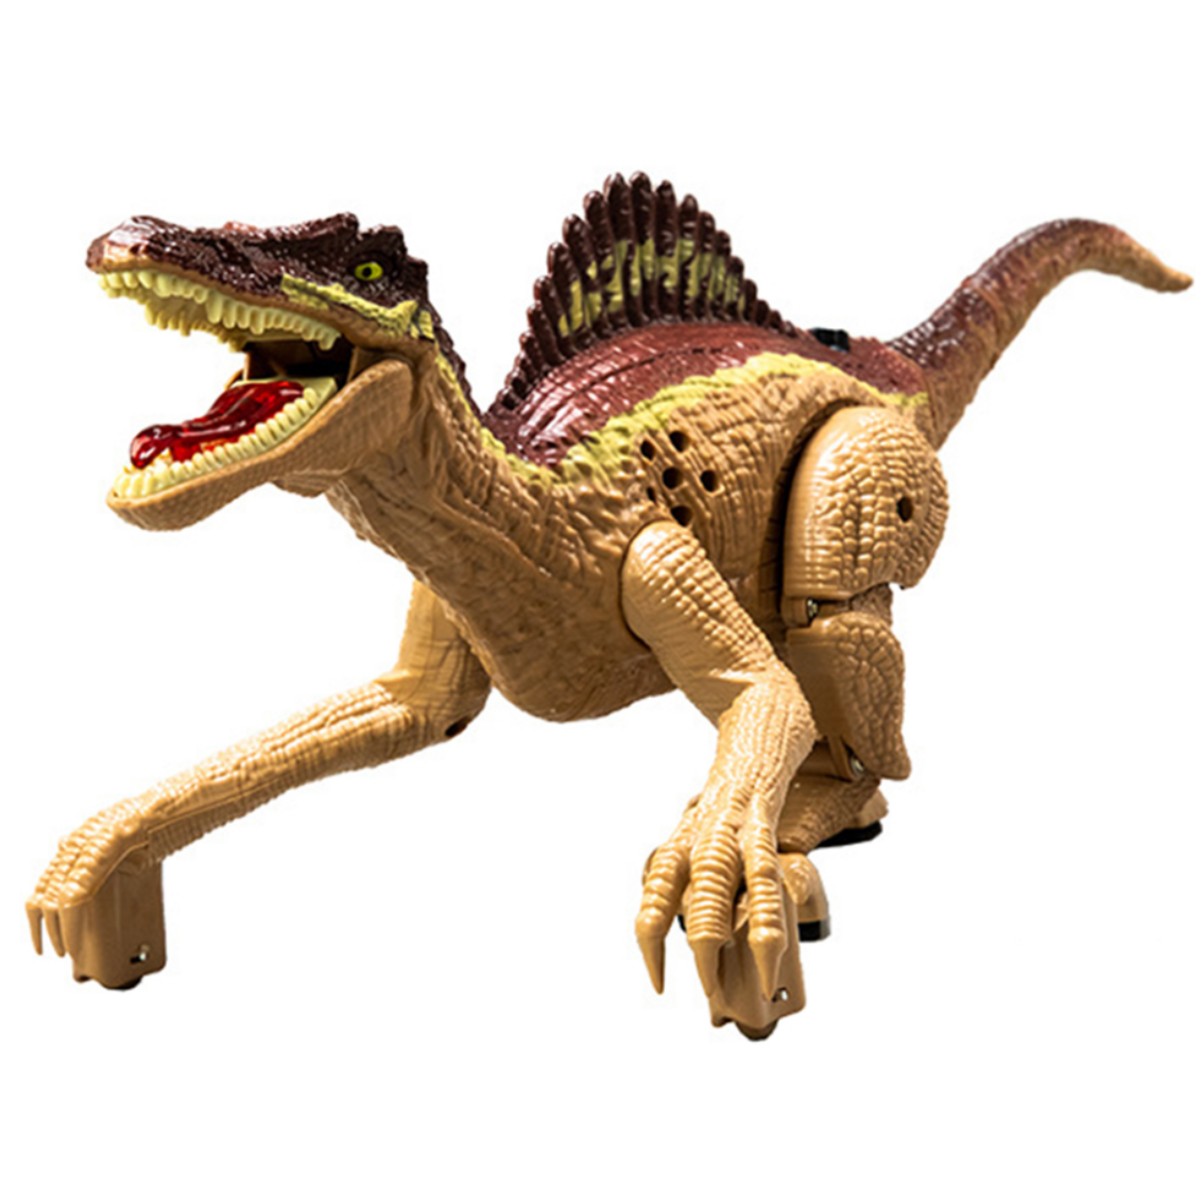 Remote Control Dinosaur Toys For Kids 2.4Ghz Realistic Jurassic Dinosaur RC Robot Toy With Light Sound Birthday Gifts For Boys Girls brown